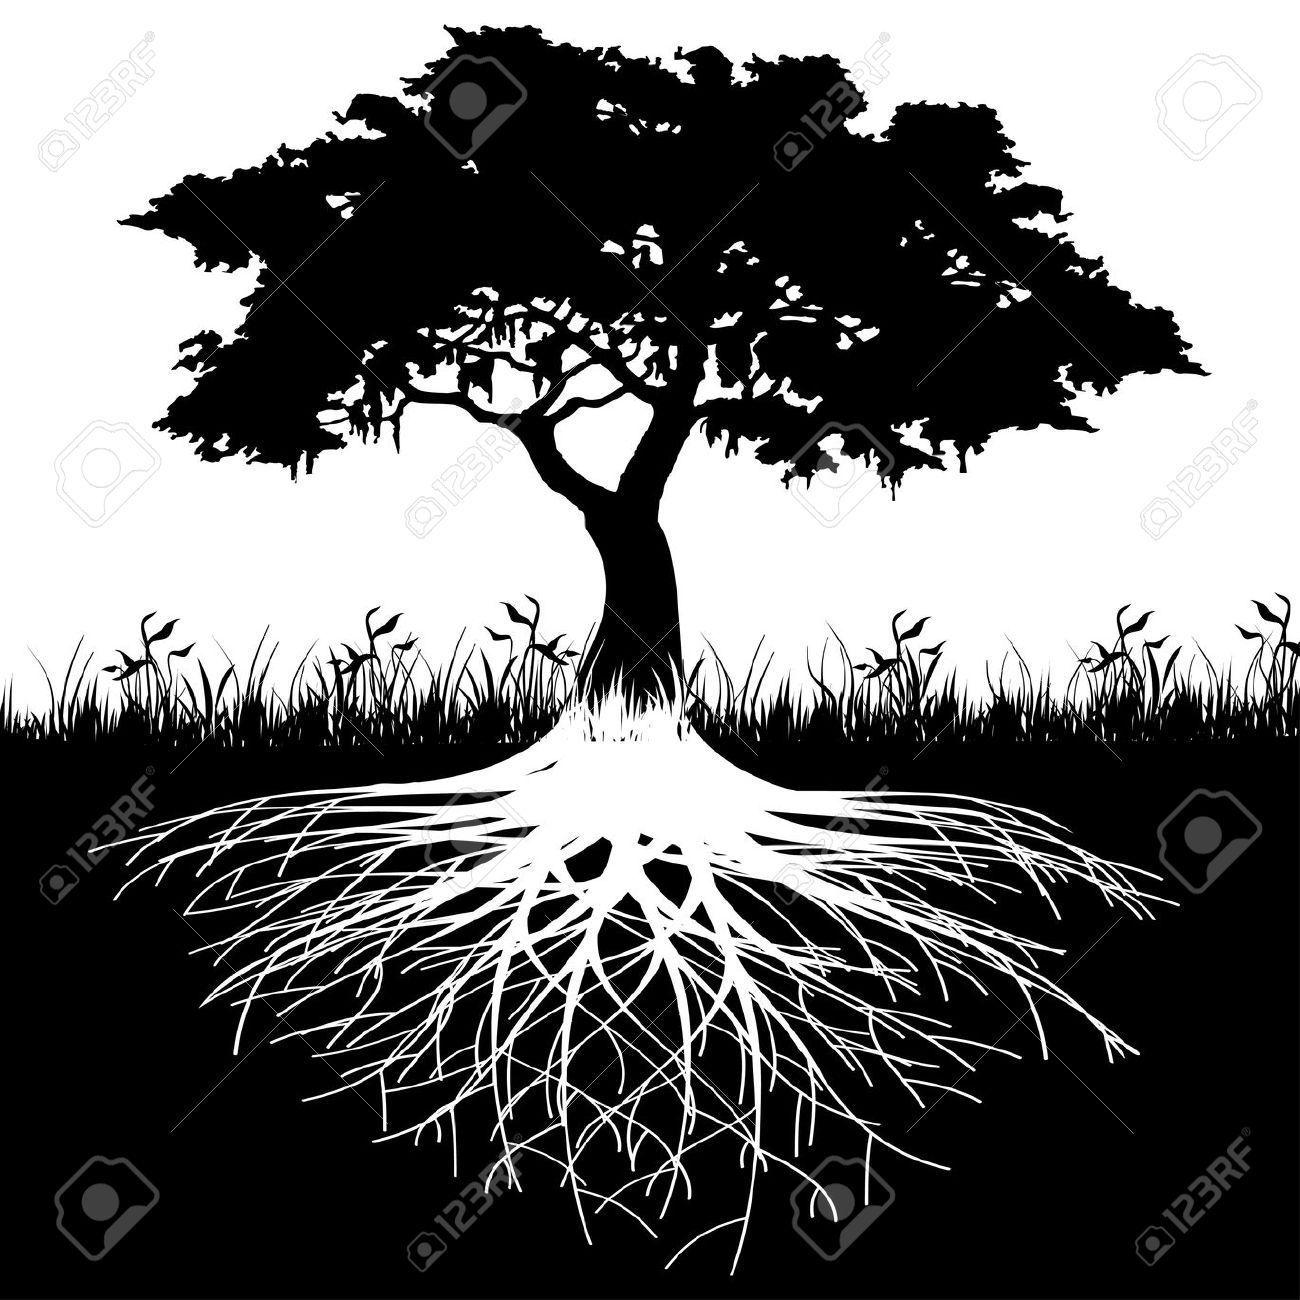 Black Tree with Roots Logo - tree of life with roots clipart | Designs for others | Tree ...